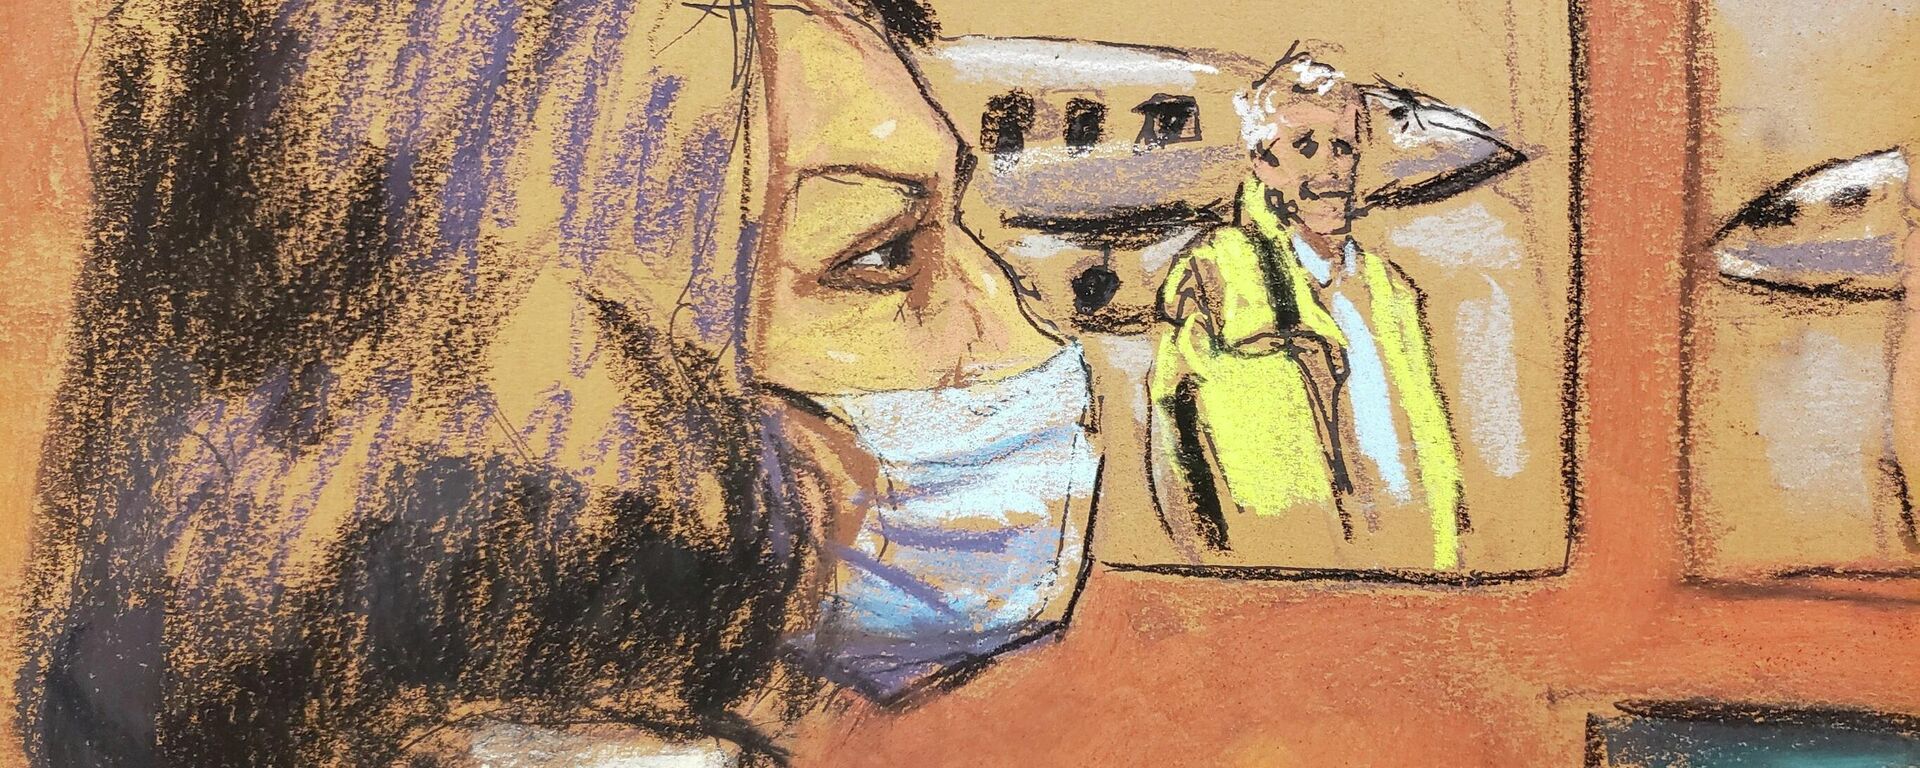 Lawrence Visoski (not seen), former longtime pilot for Jeffrey Epstein, testifies during Ghislaine Maxwell's trial on charges of sex trafficking, in a courtroom sketch in New York City, U.S., November 30, 2021.  - Sputnik International, 1920, 30.11.2021